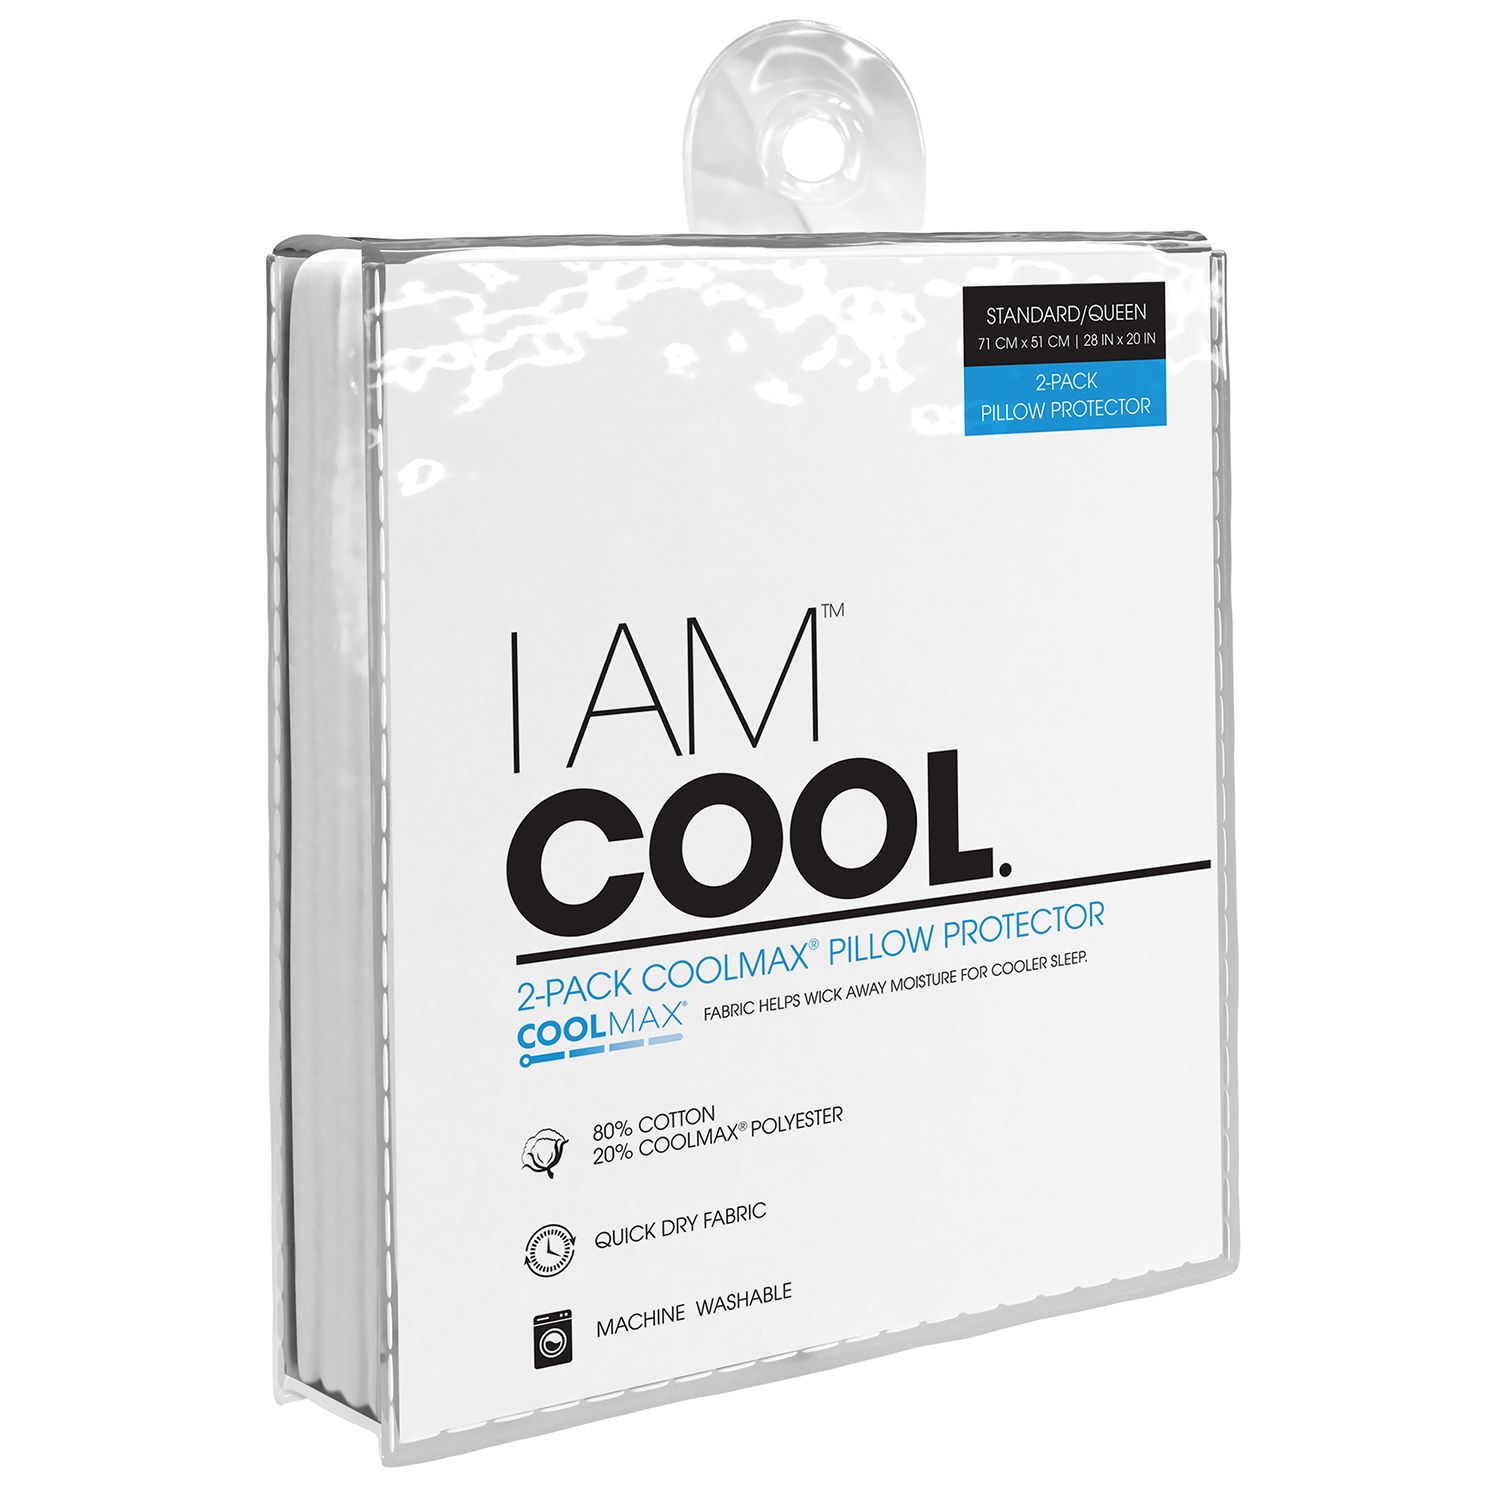 Image for I Am Cool Pillow Protector - 2-pack at Kohl's.